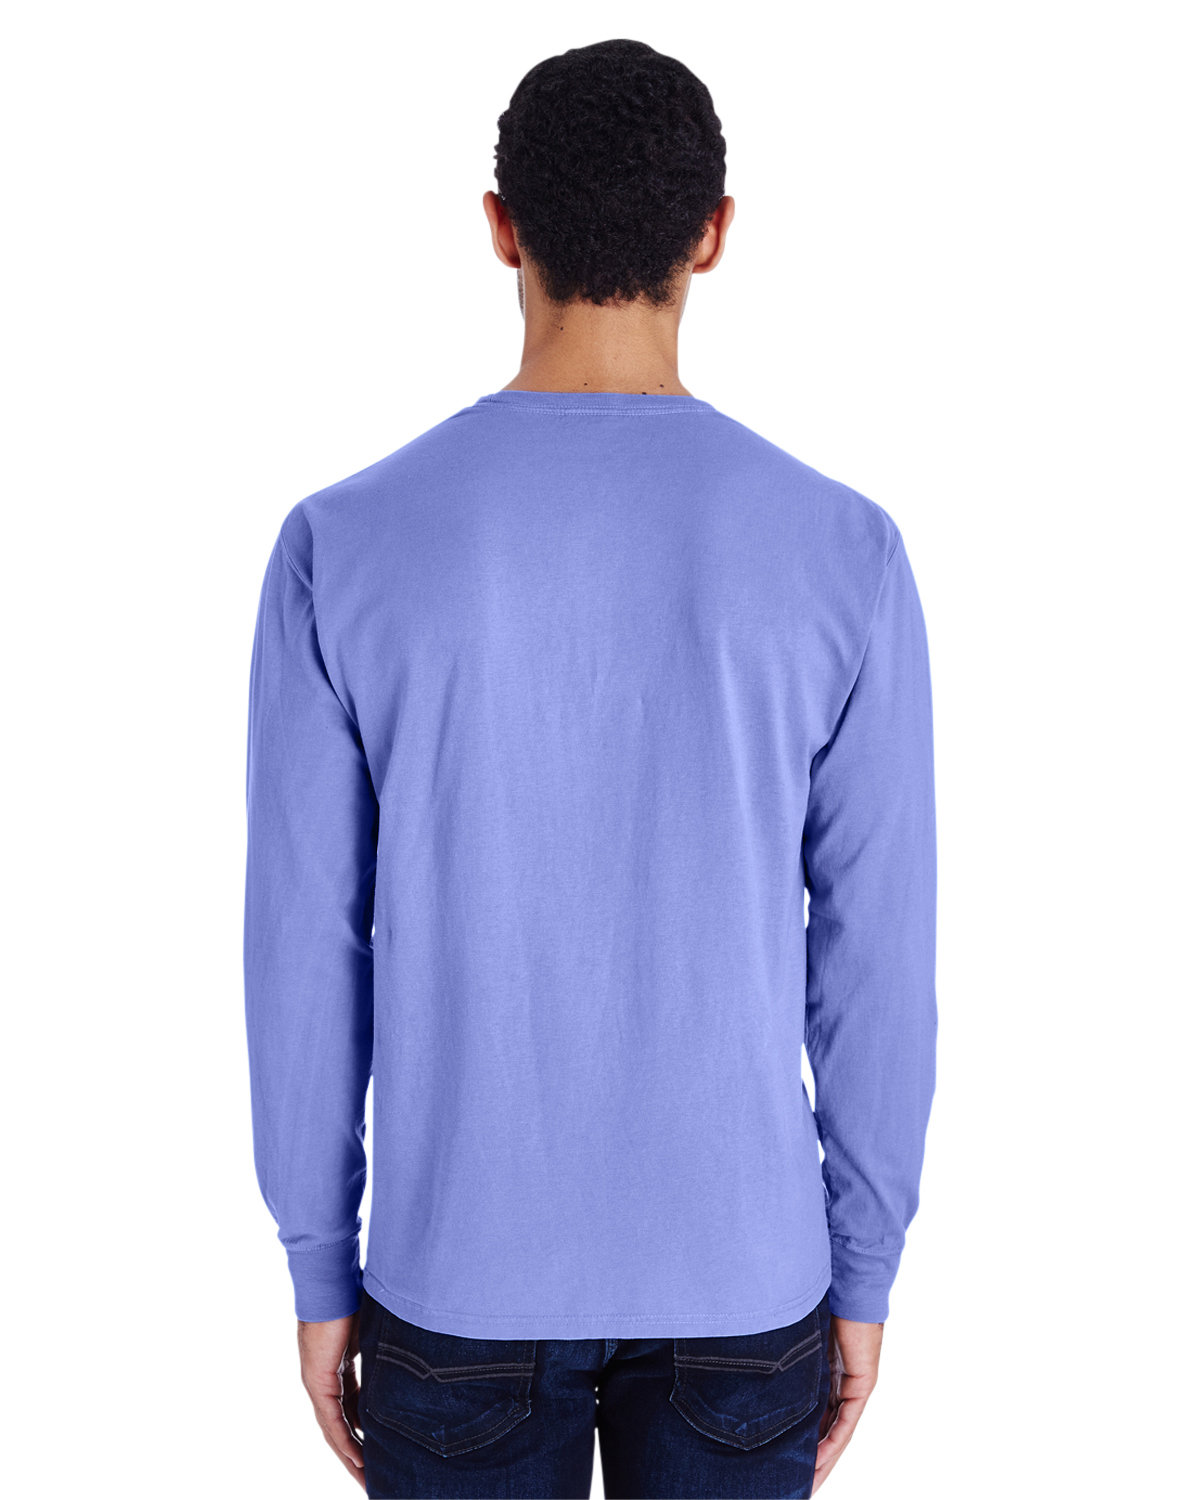 ComfortWash by Hanes Unisex Garment-Dyed Long-Sleeve T-Shirt | alphabroder